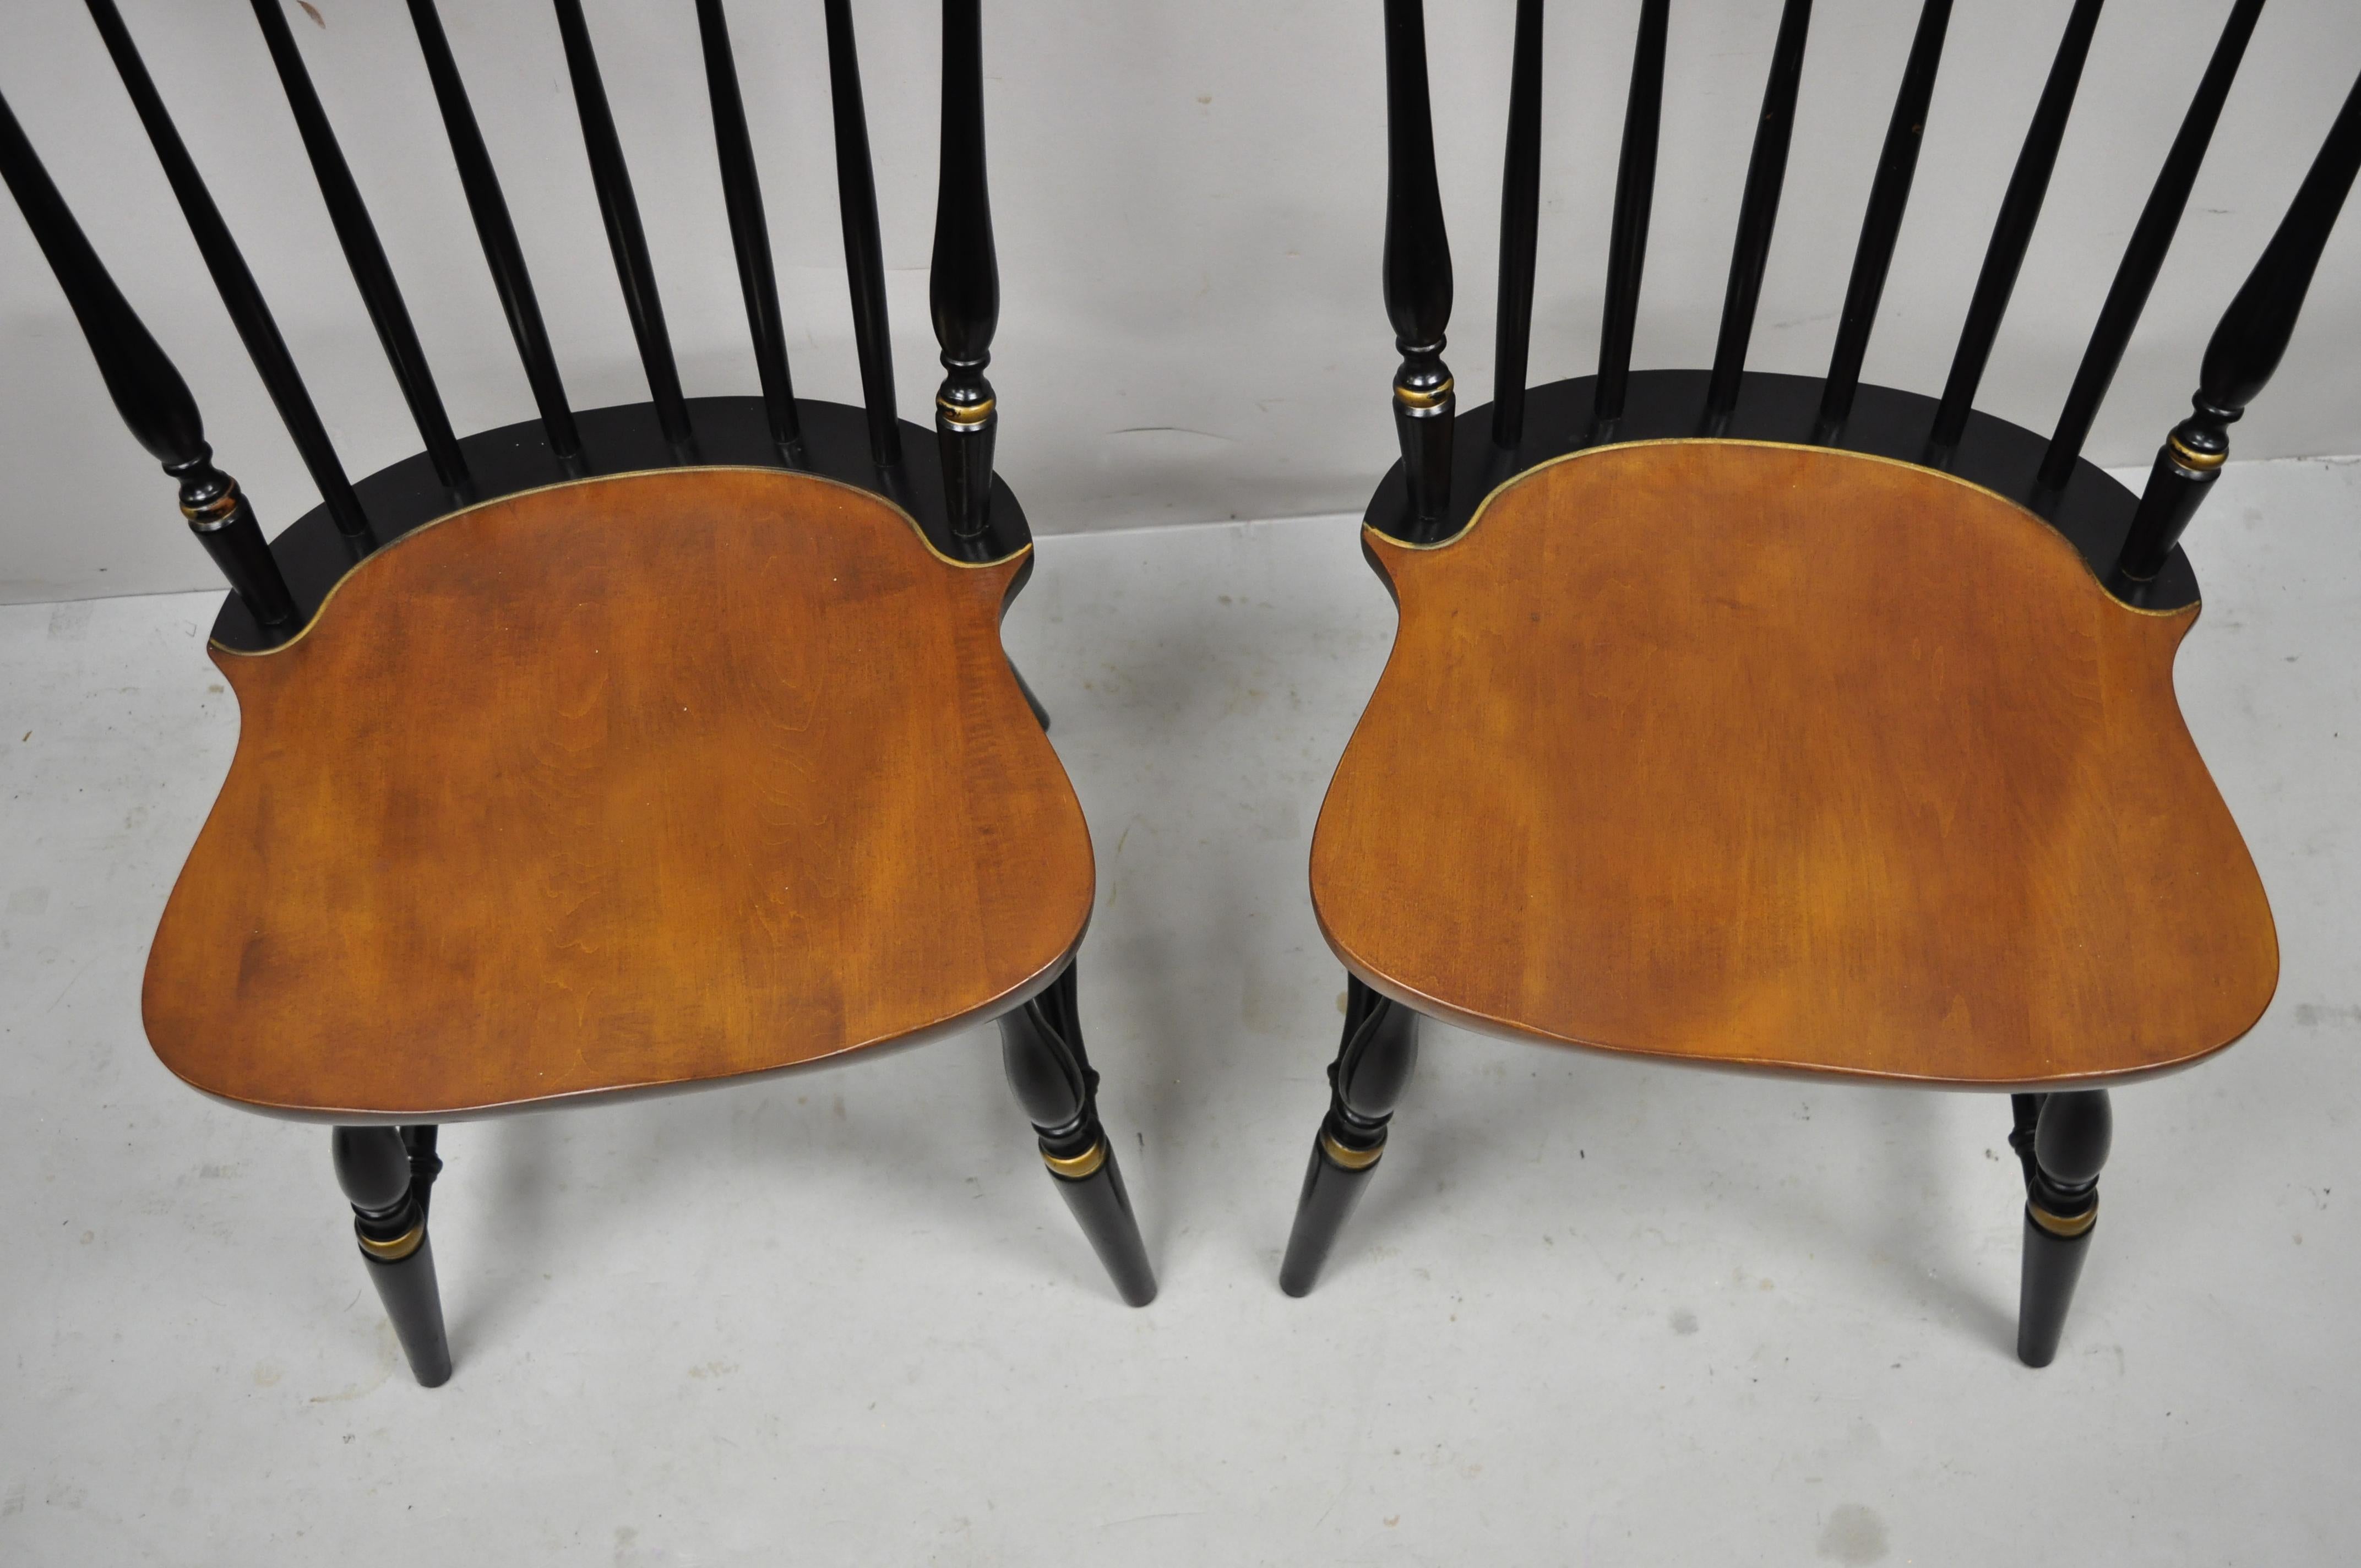 l. hitchcock chairs